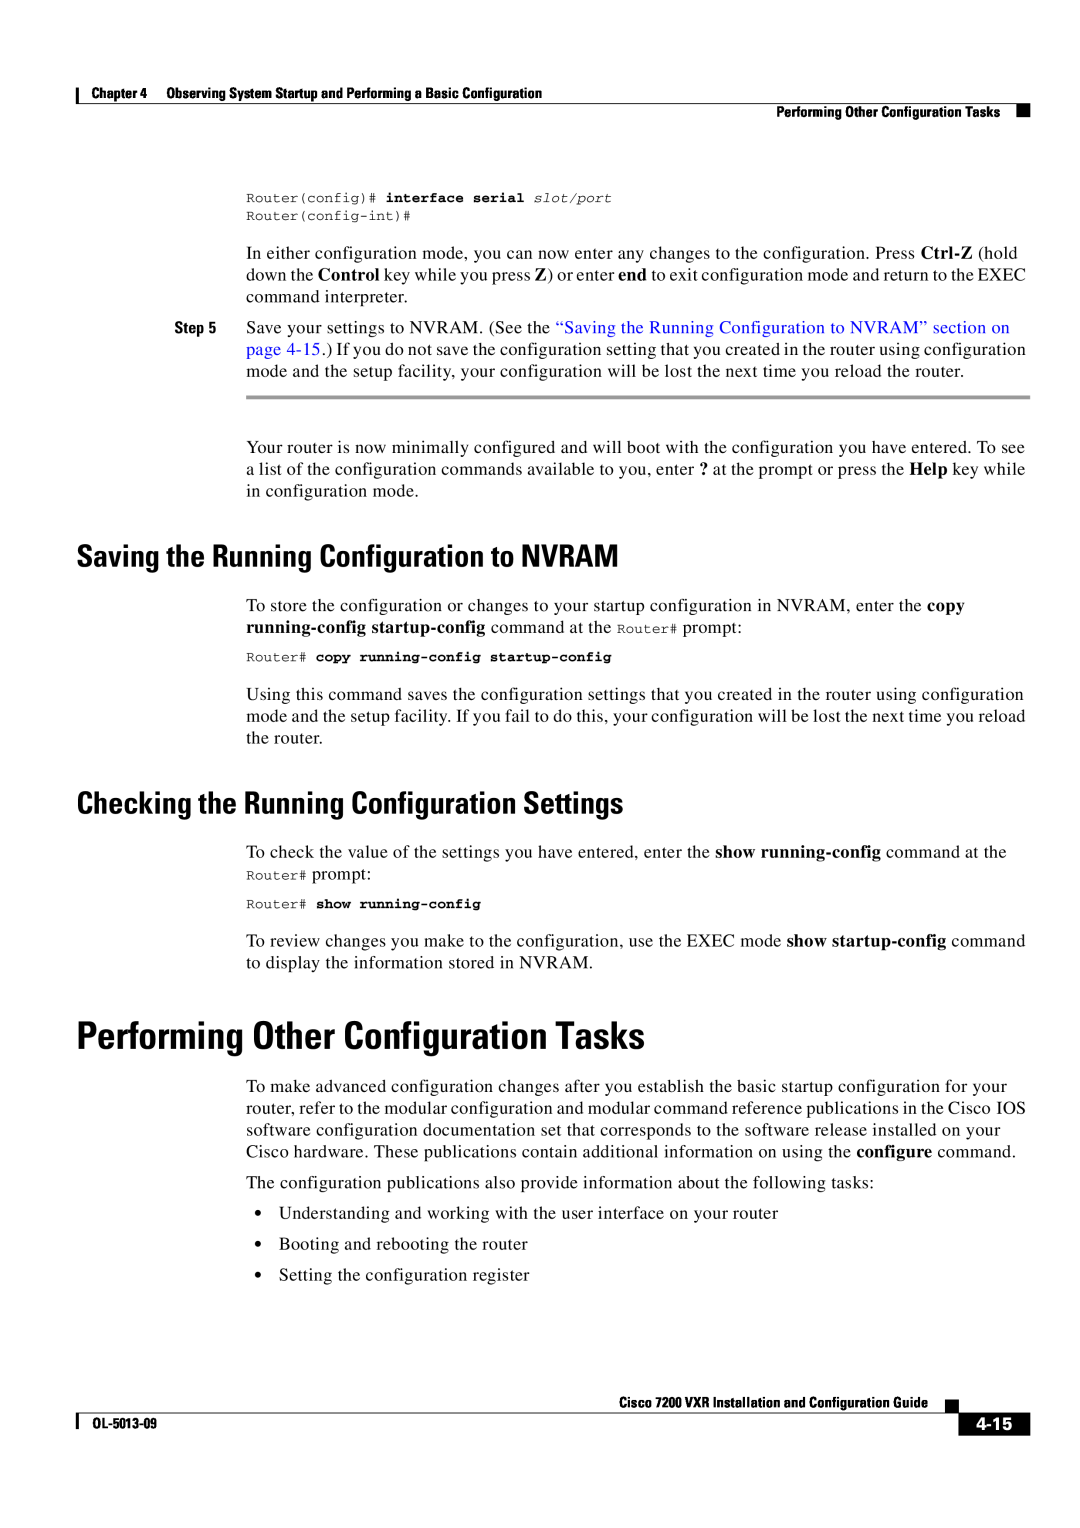 Cisco Systems 7200 VXR manual Performing Other Configuration Tasks, Saving the Running Configuration to NVRAM, 4-15 